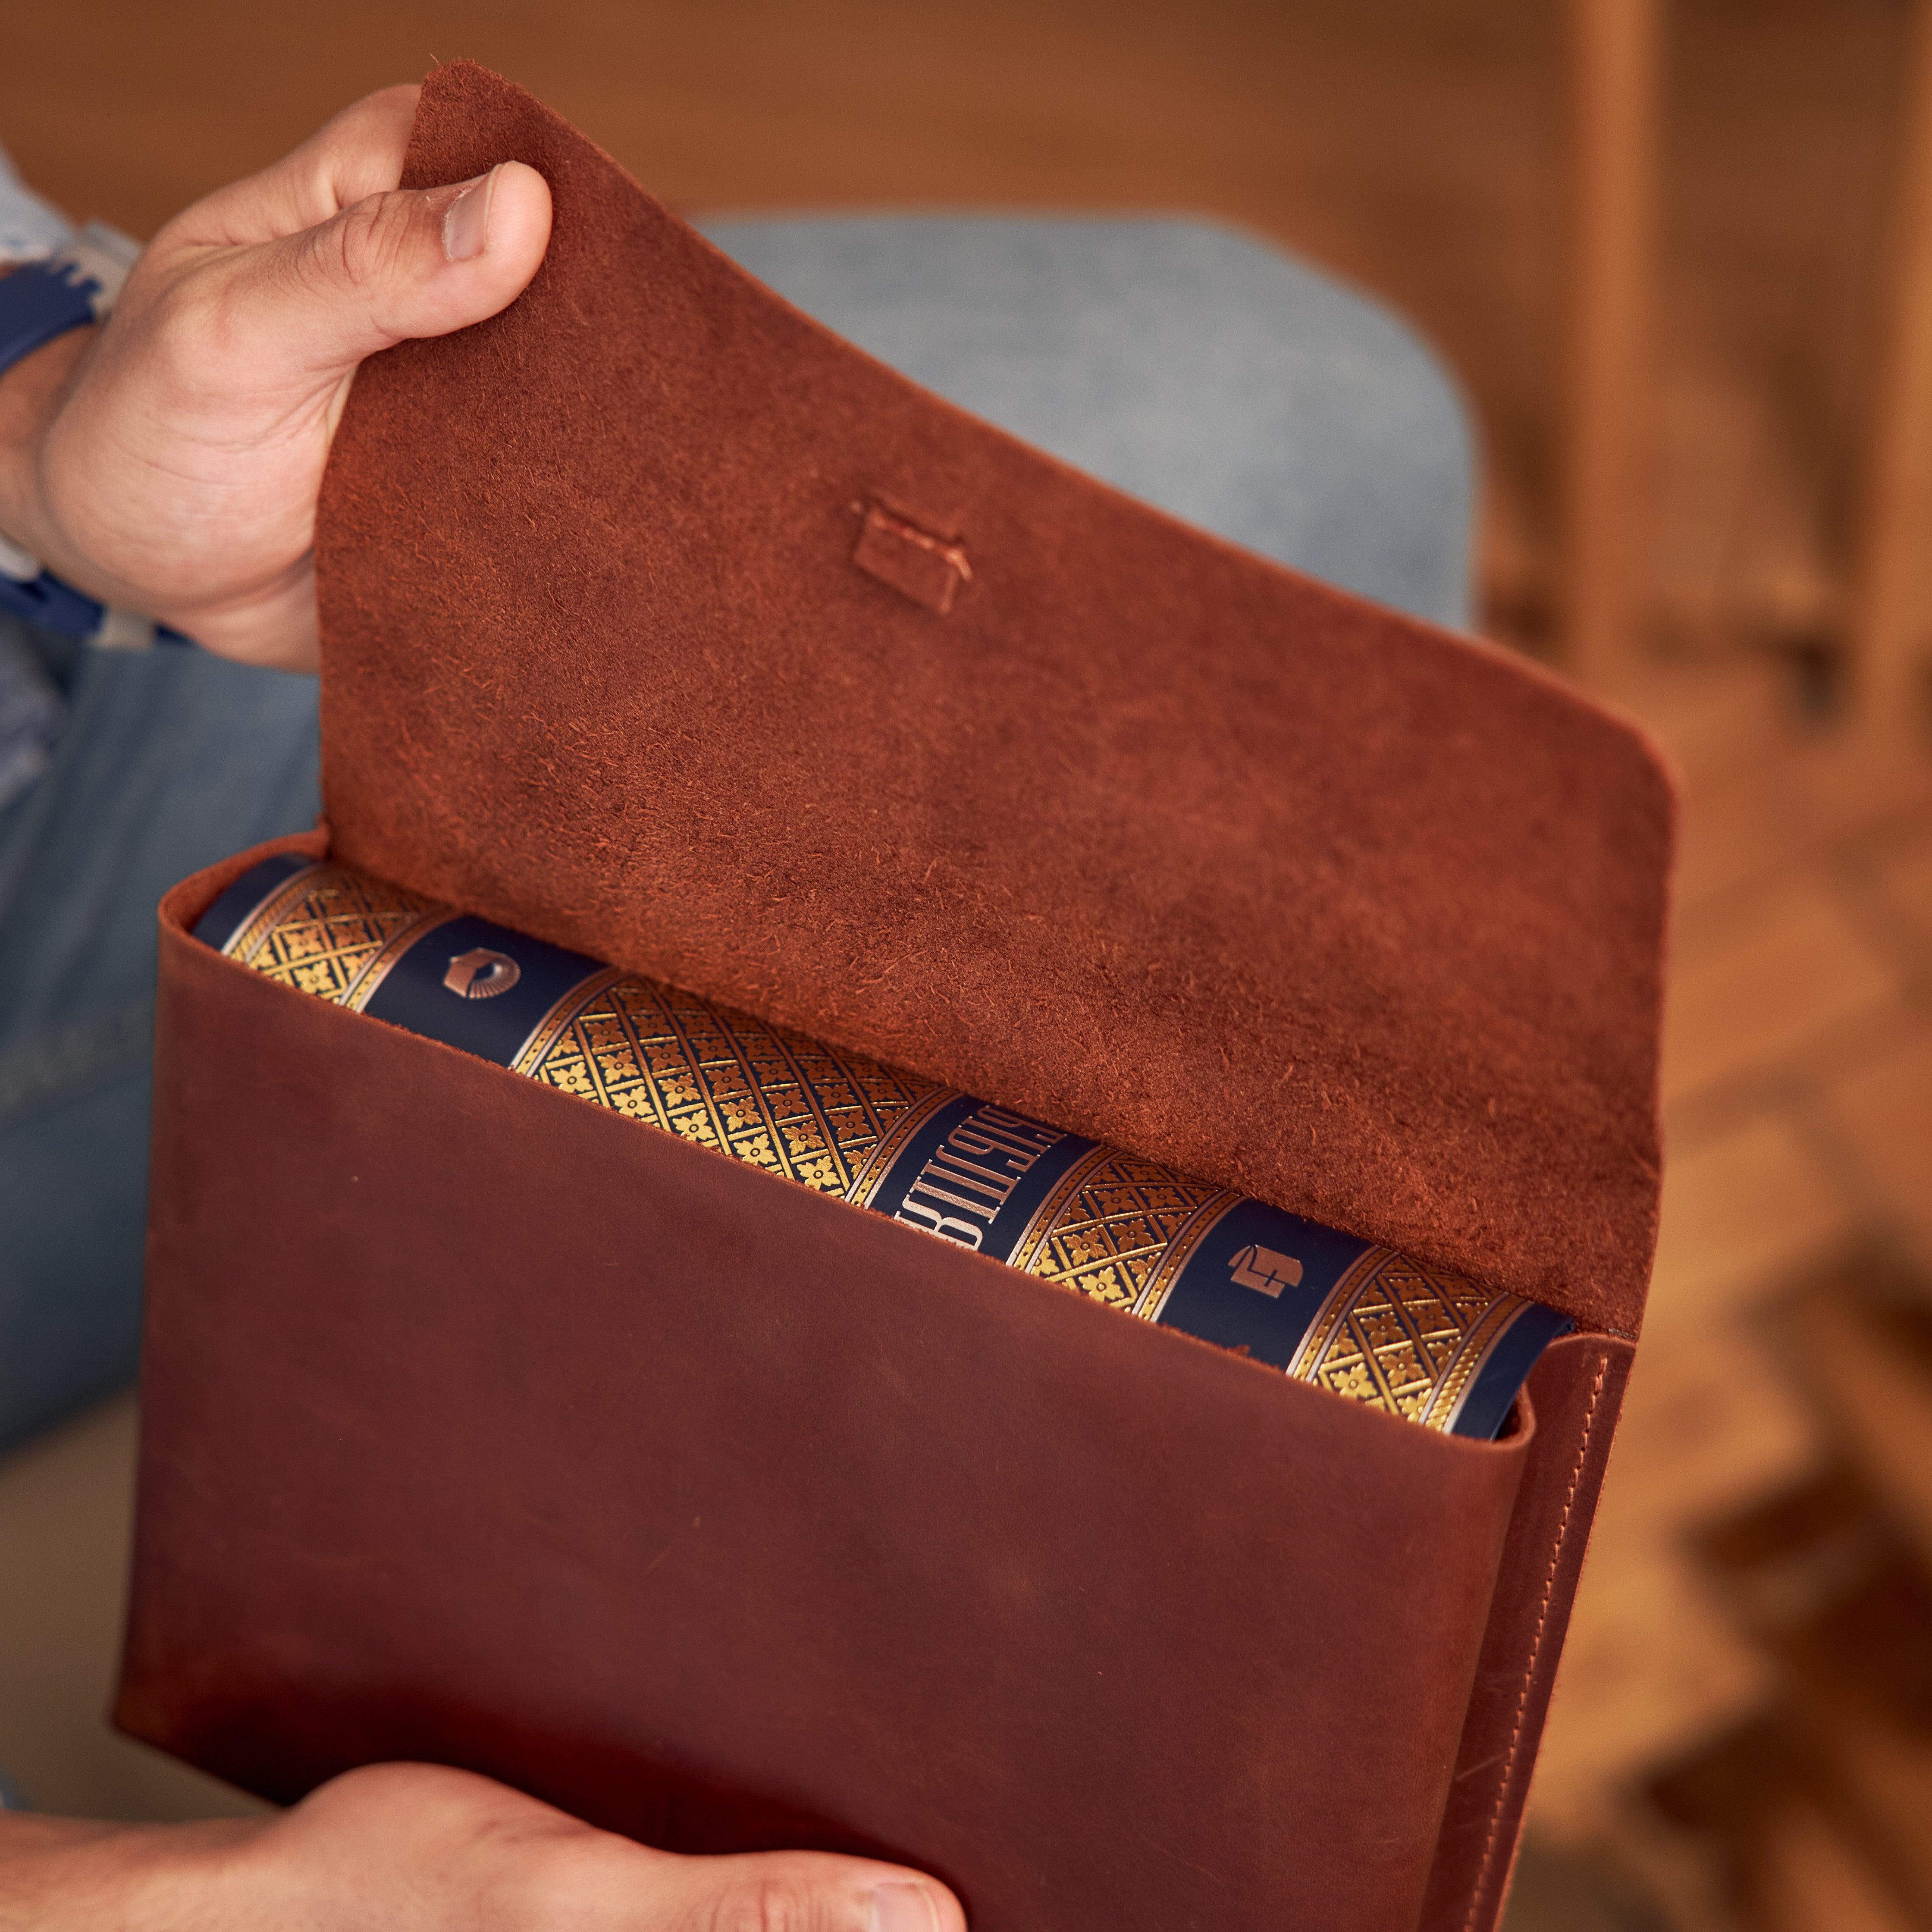 Personalized Bible Cover Leather